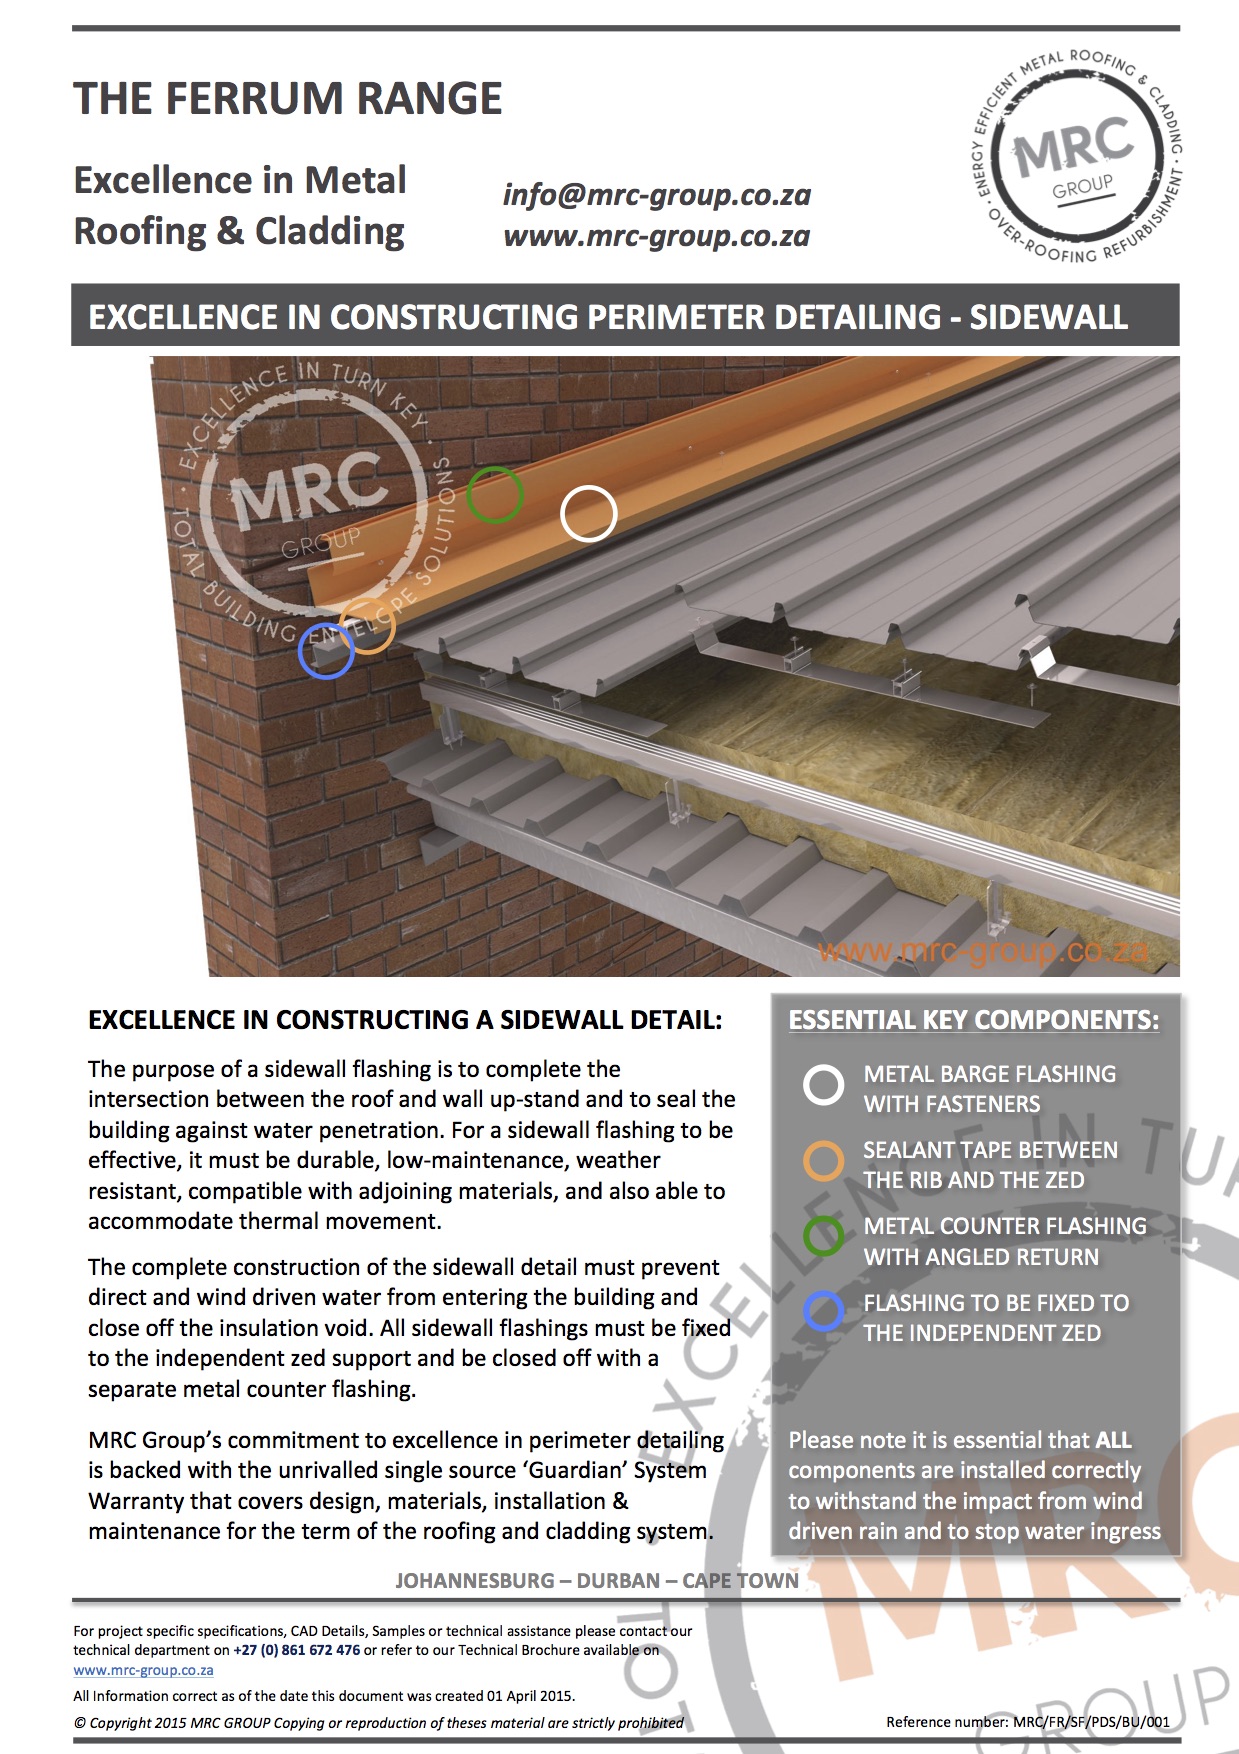 MRC Group Perimeter Detailing Sidewall Secret Fix Metal Roofing backed with the Guardian System Warranty Data Sheet June 2015